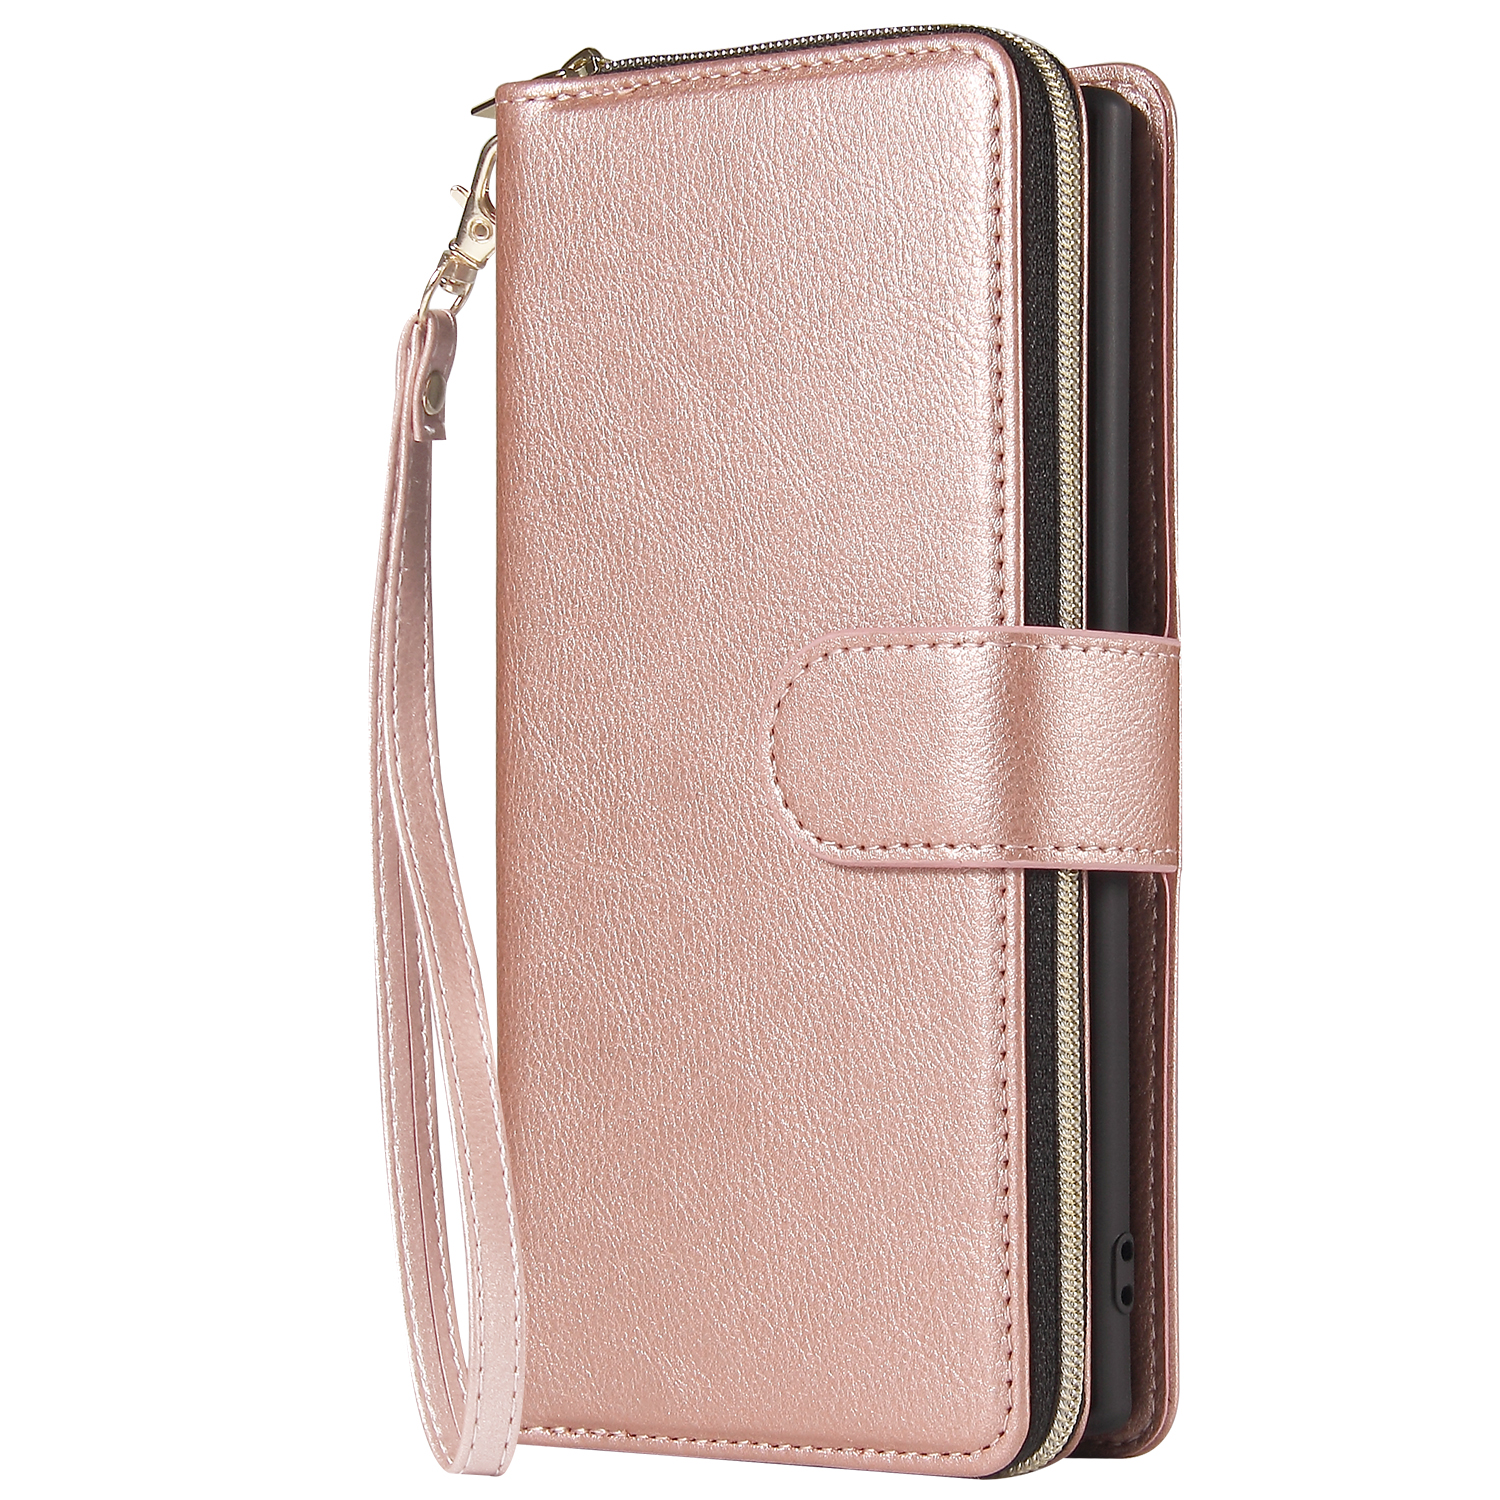 For Samsung A51 5G/A71 5G/Note 10 pro Pu Leather  Mobile Phone Cover Zipper Card Bag + Wrist Strap Rose gold